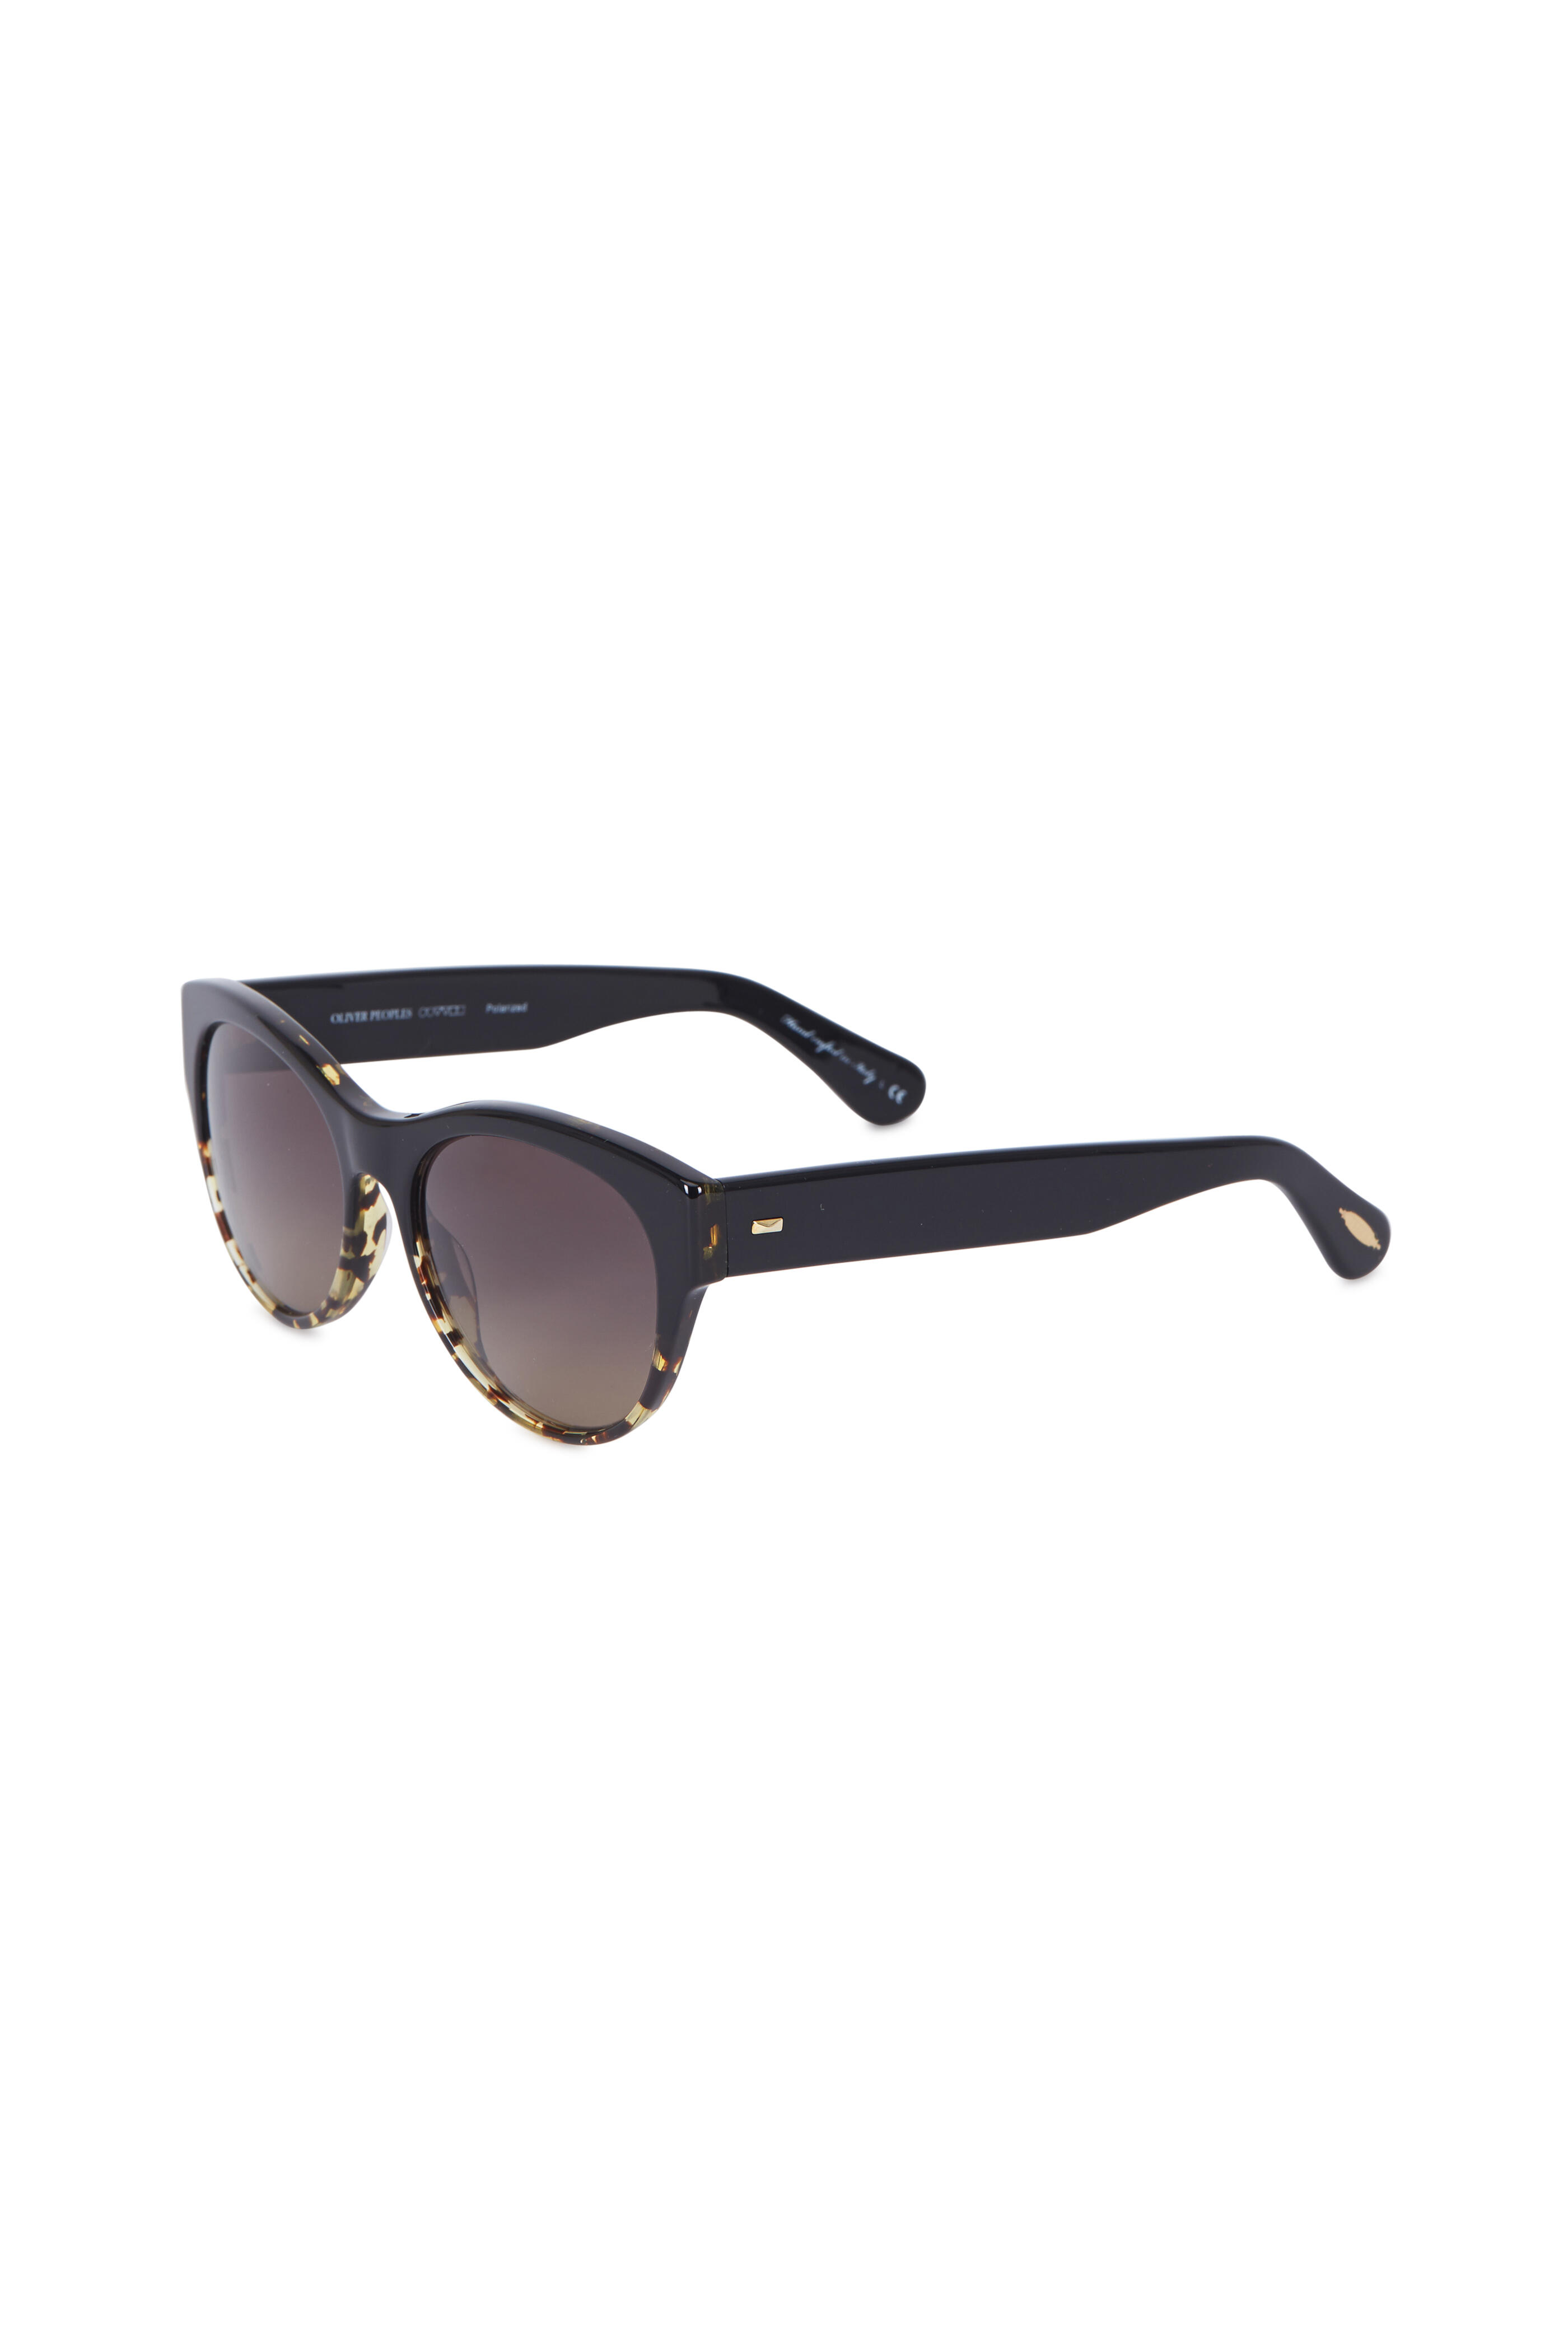 Oliver Peoples - Mande 55 Sunglasses | Mitchell Stores